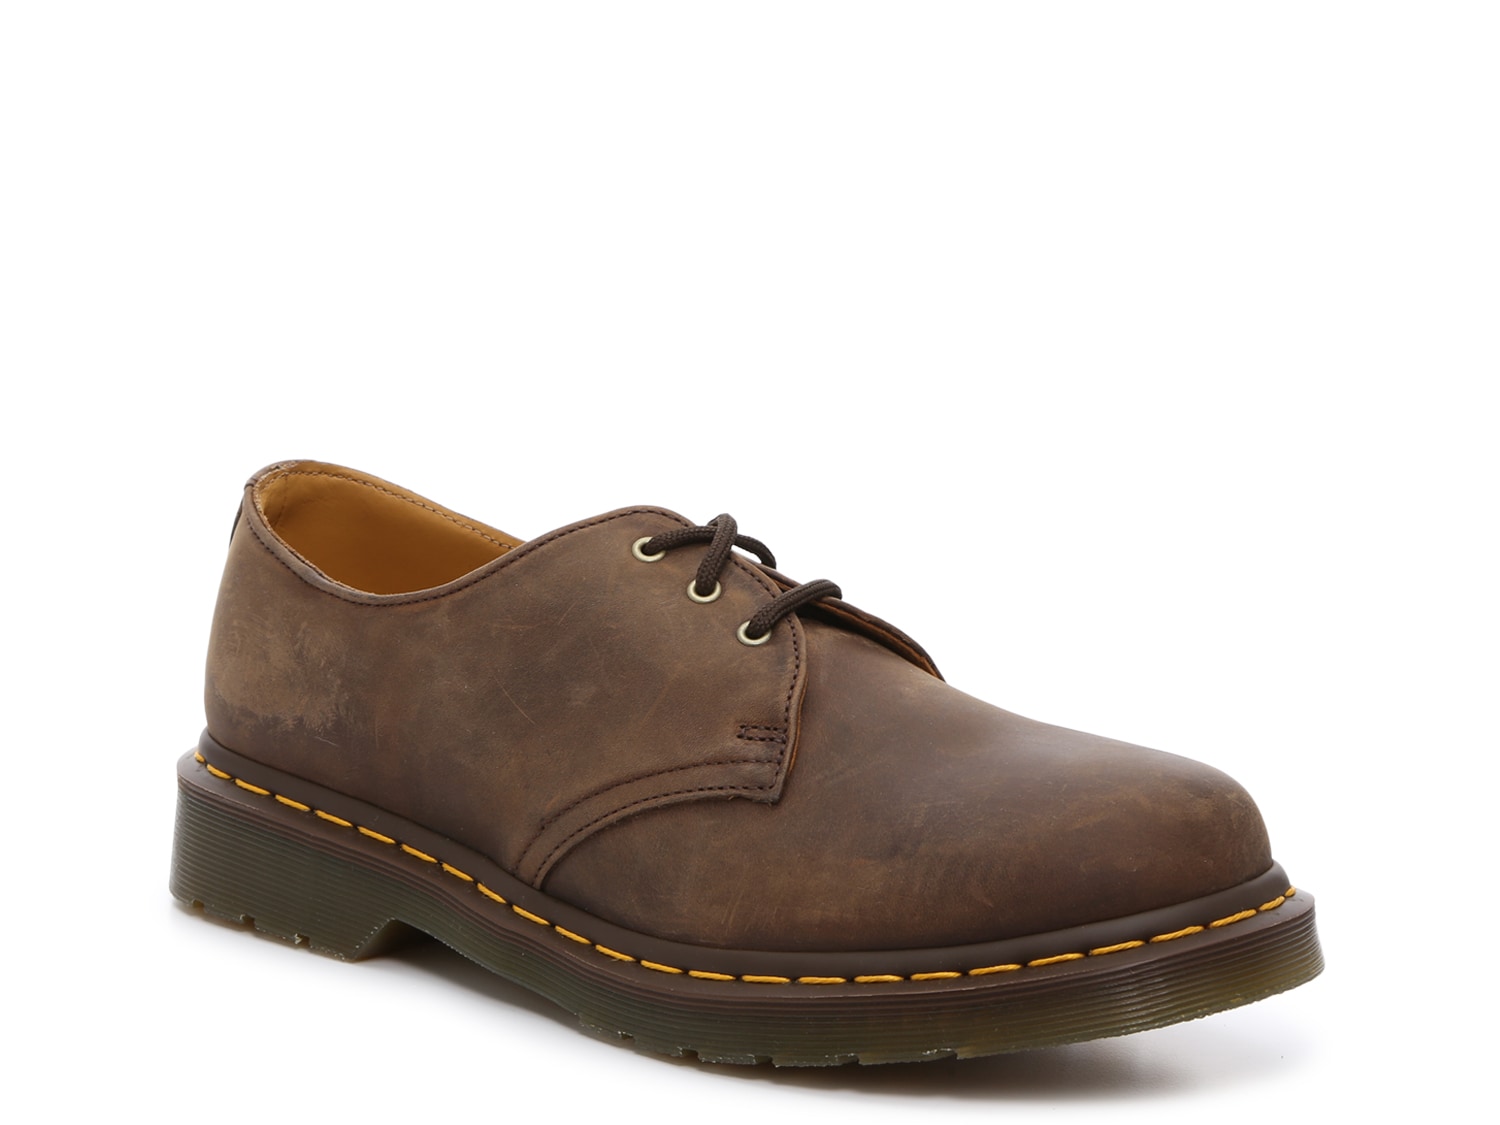 Dr. Martens 1461 Gaucho Crazy Horse Oxford - Men's - Free Shipping | DSW